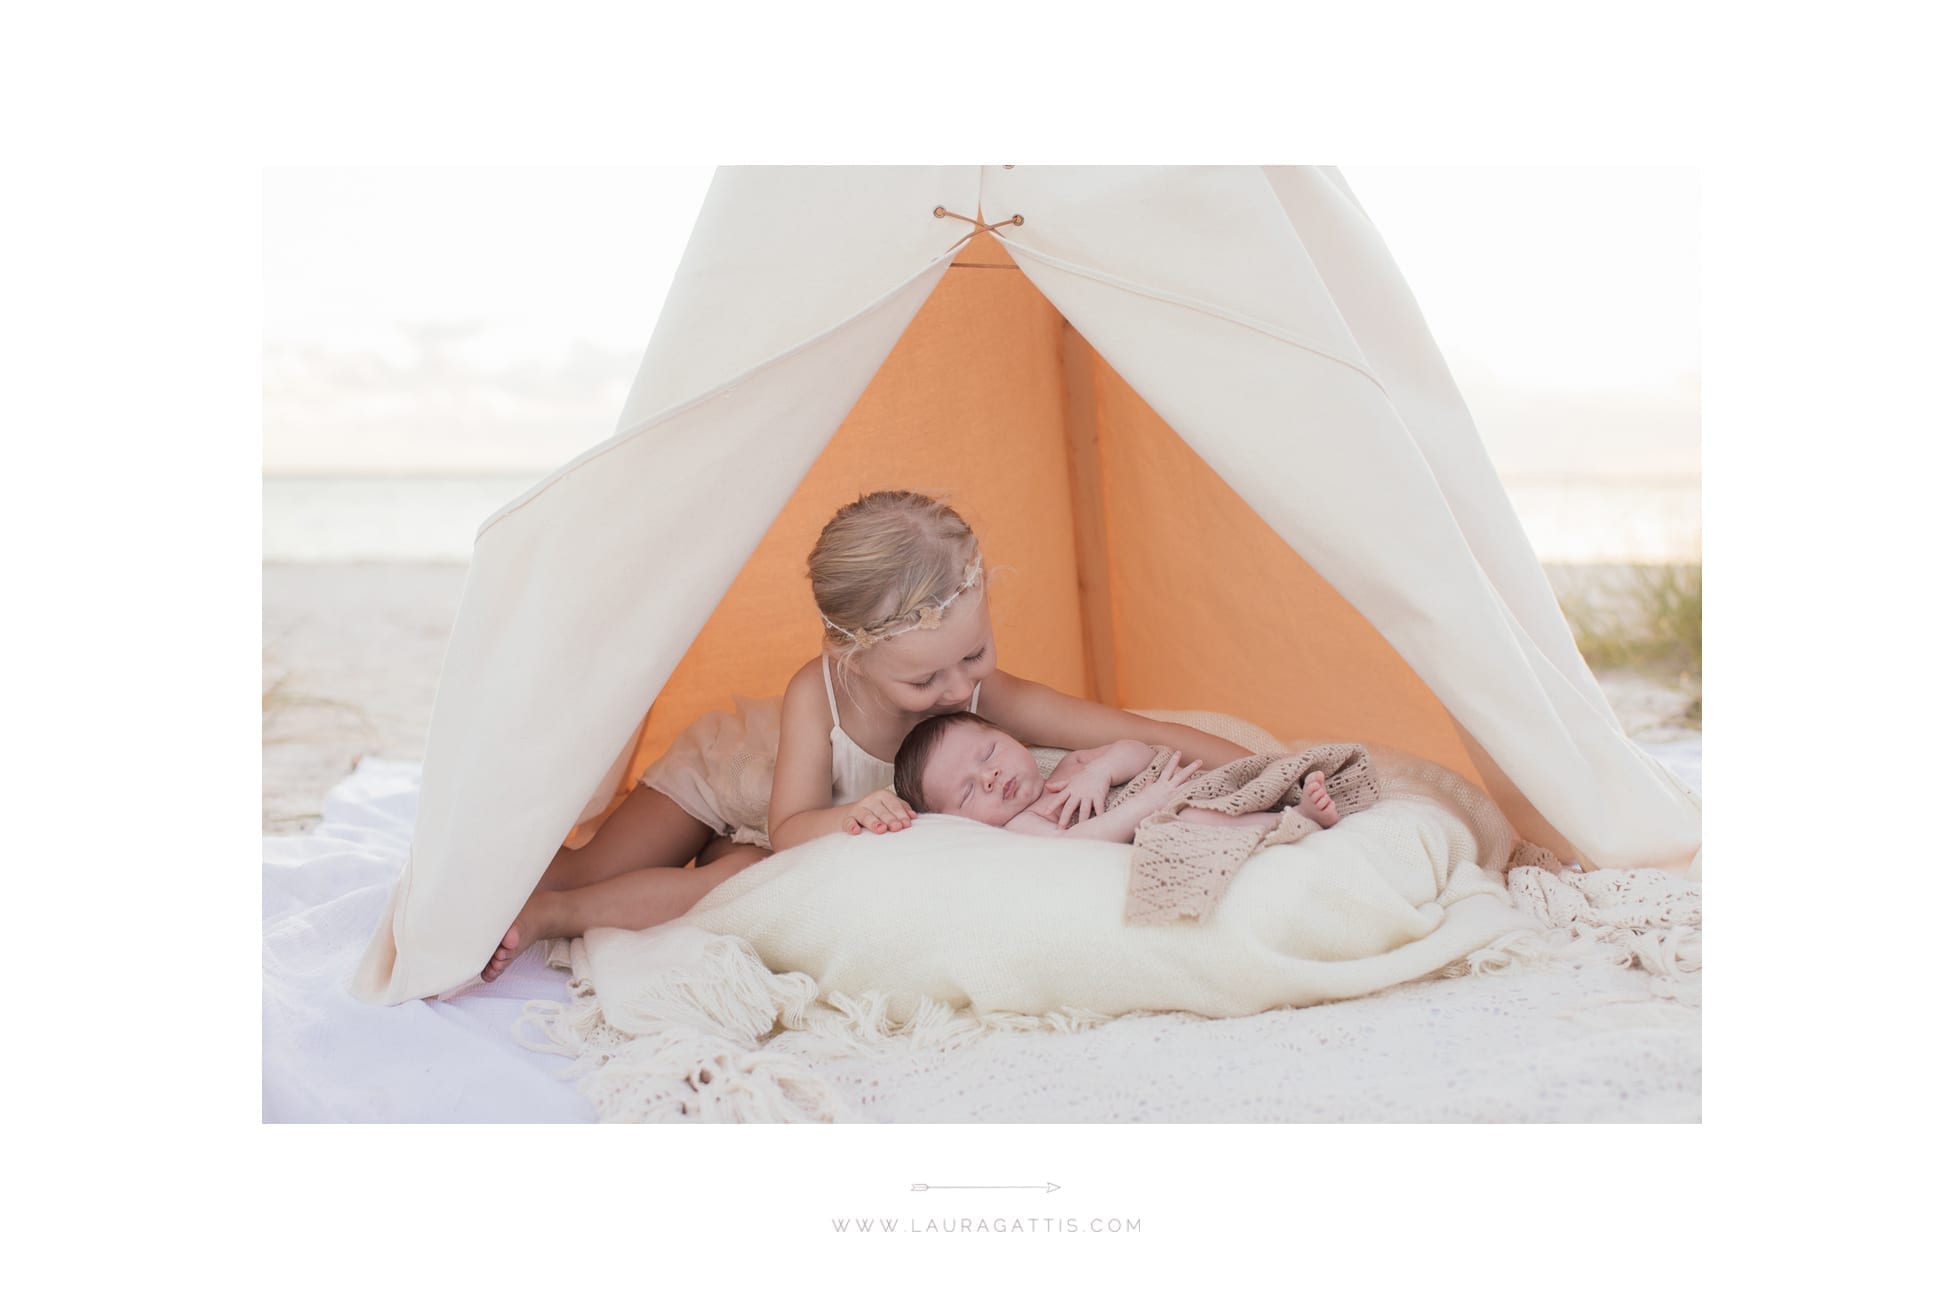 outdoor newborn session | natural light photography | laura gattis photography